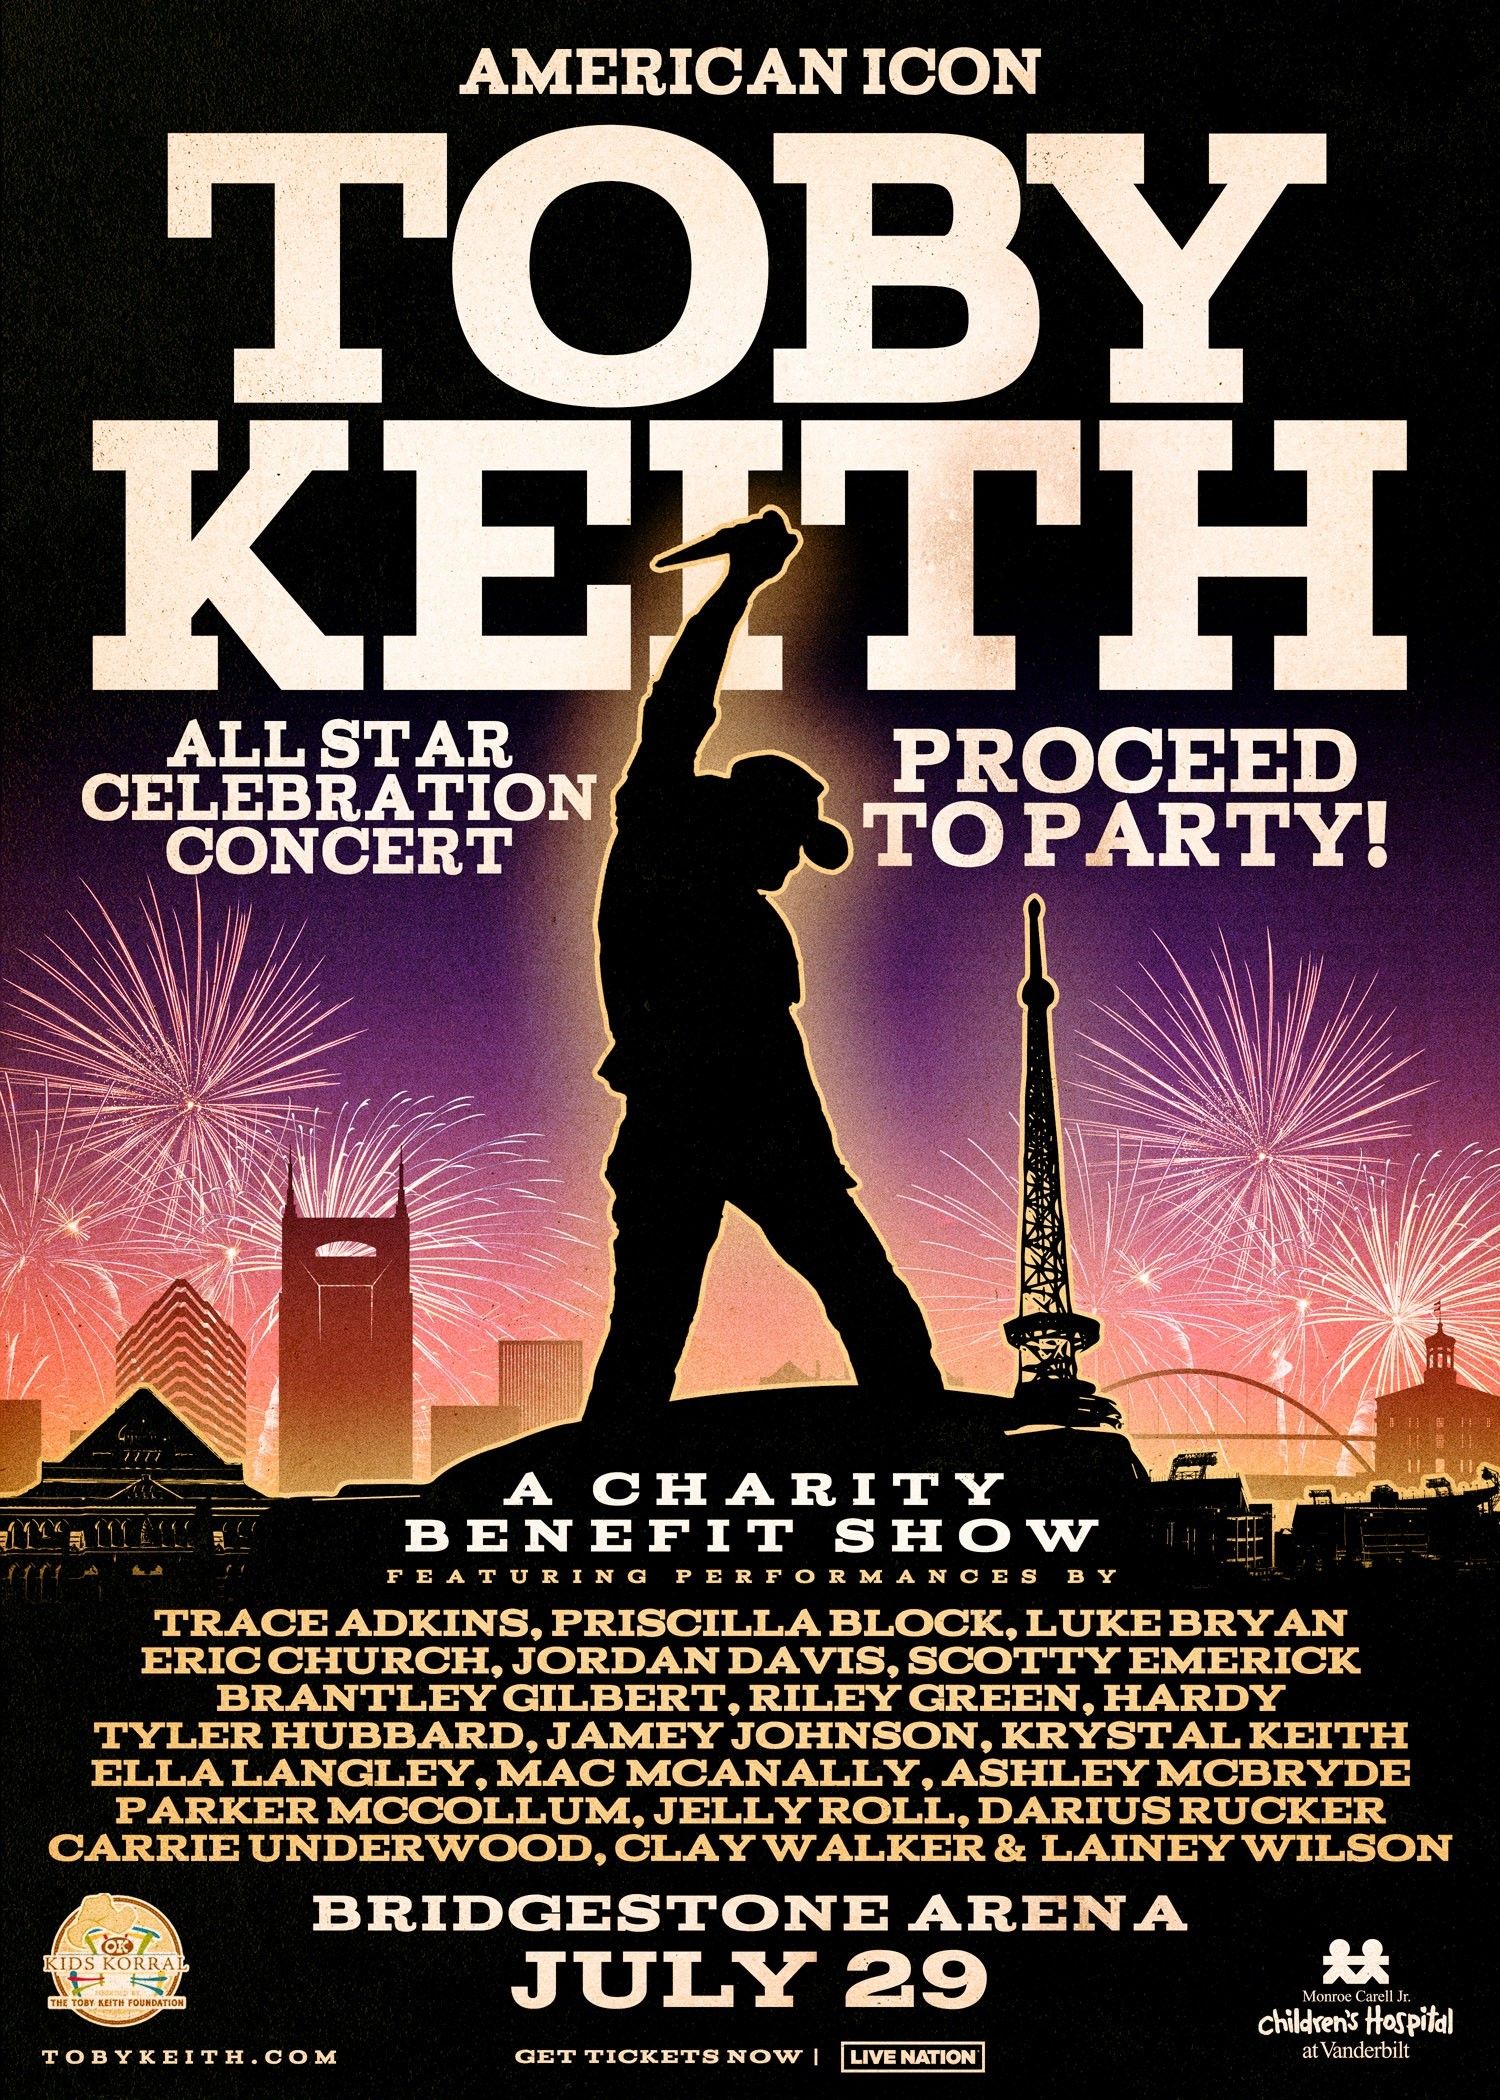 All-Star Lineup Slated for “Toby Keith: American Icon” at Bridgestone Arena on Monday, July 29